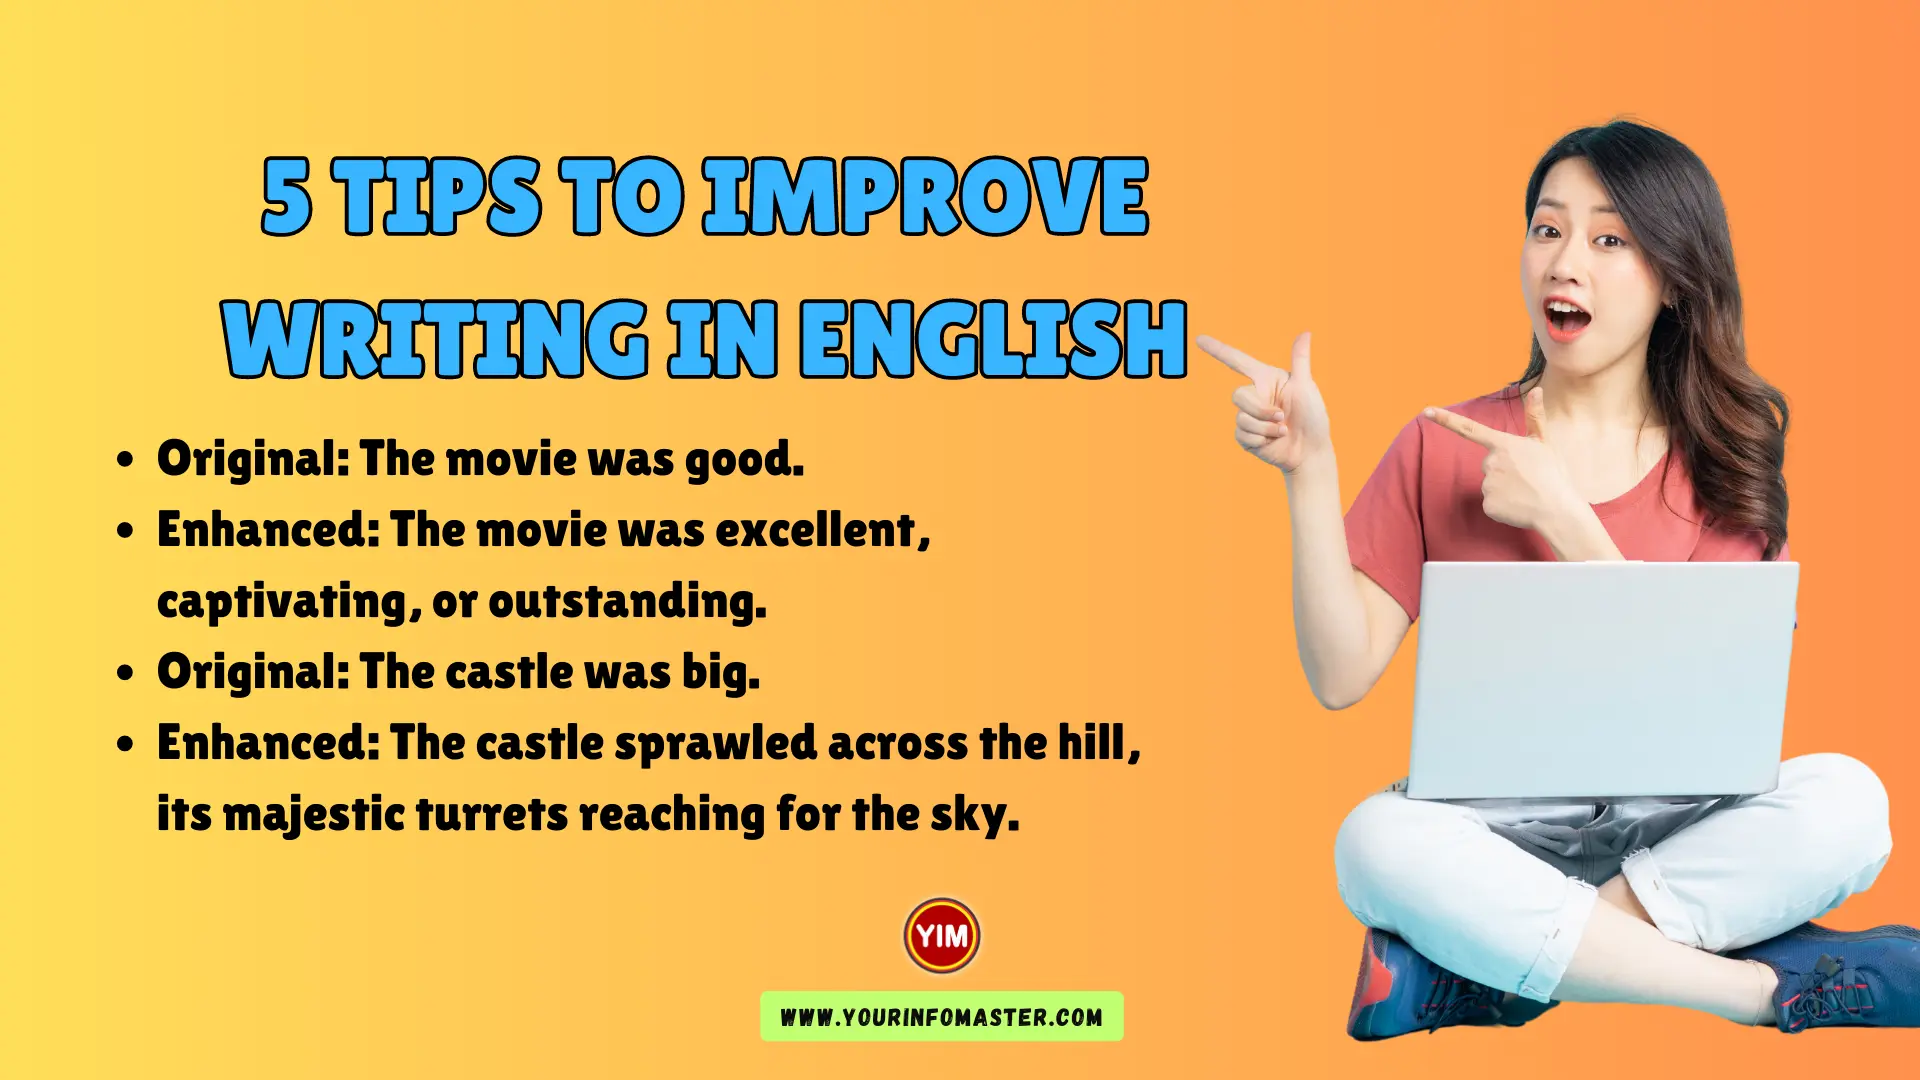 5 Tips to Improve Writing in English